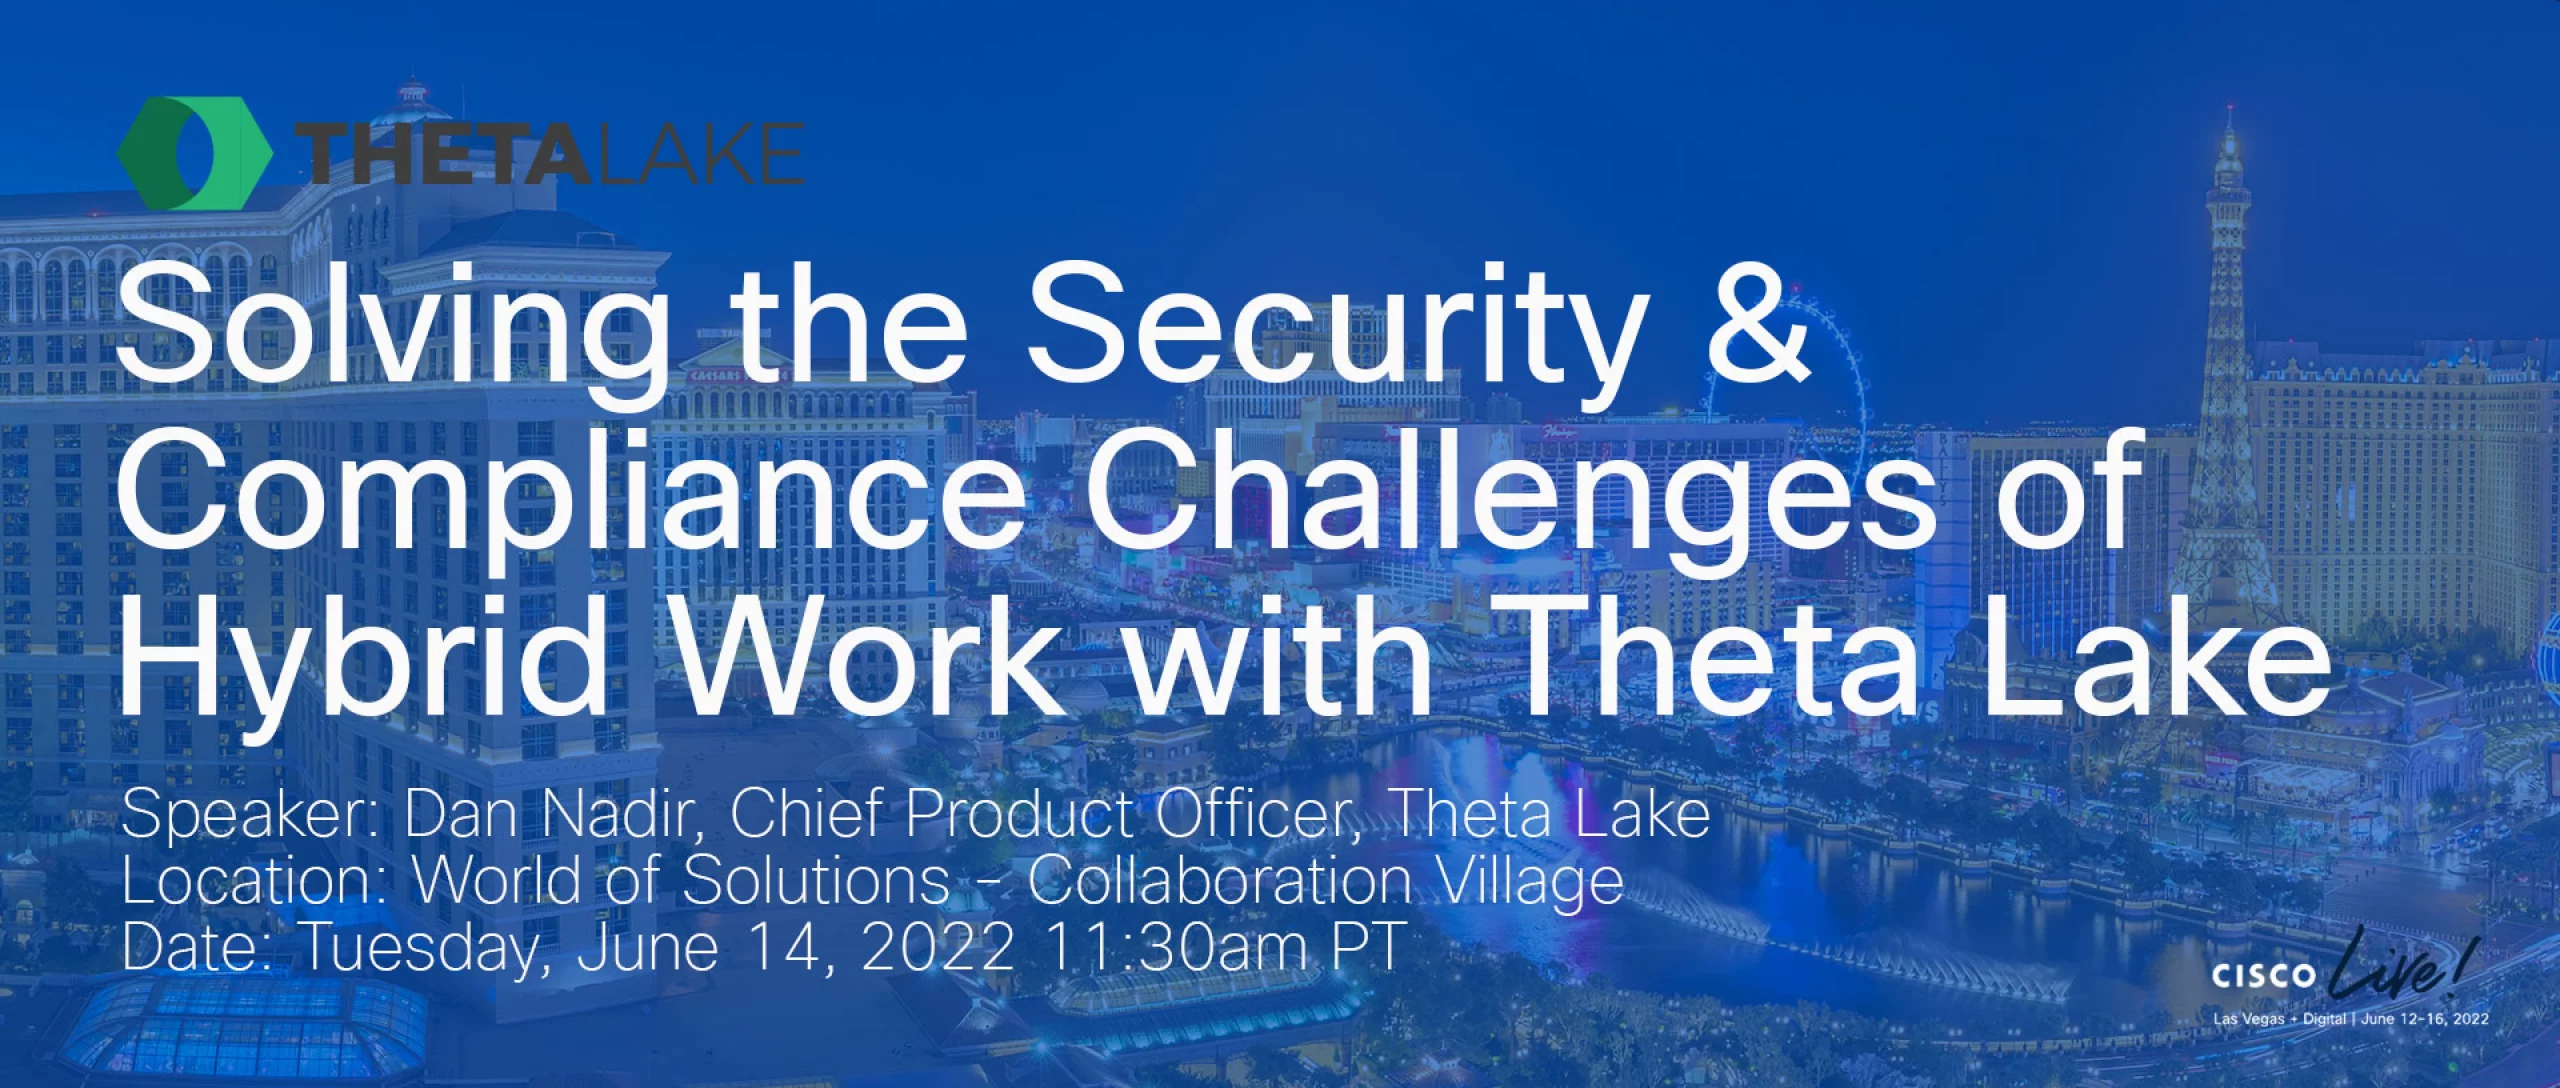 Solving the security and compliance challenges of hybrid work with Theta Lake.